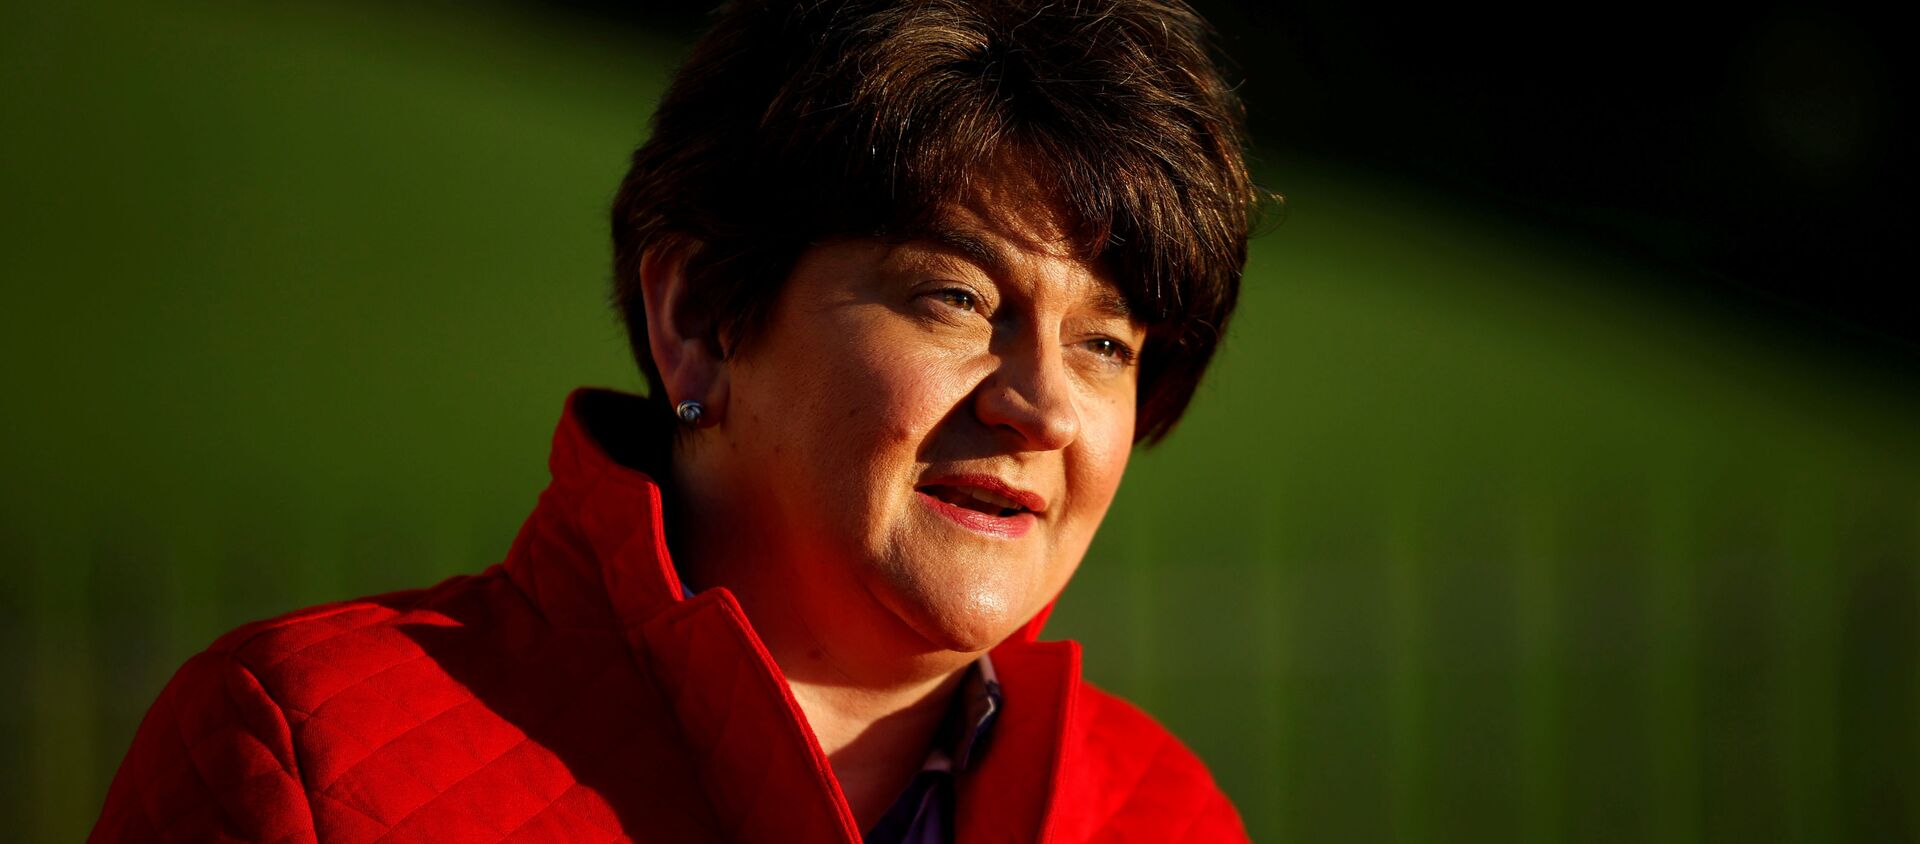 Northern Ireland's First Minister Arlene Foster answers questions during a television interview outside the Stormont Parliament building in Belfast, Northern Ireland, 30 December 2020. - Sputnik International, 1920, 05.03.2021